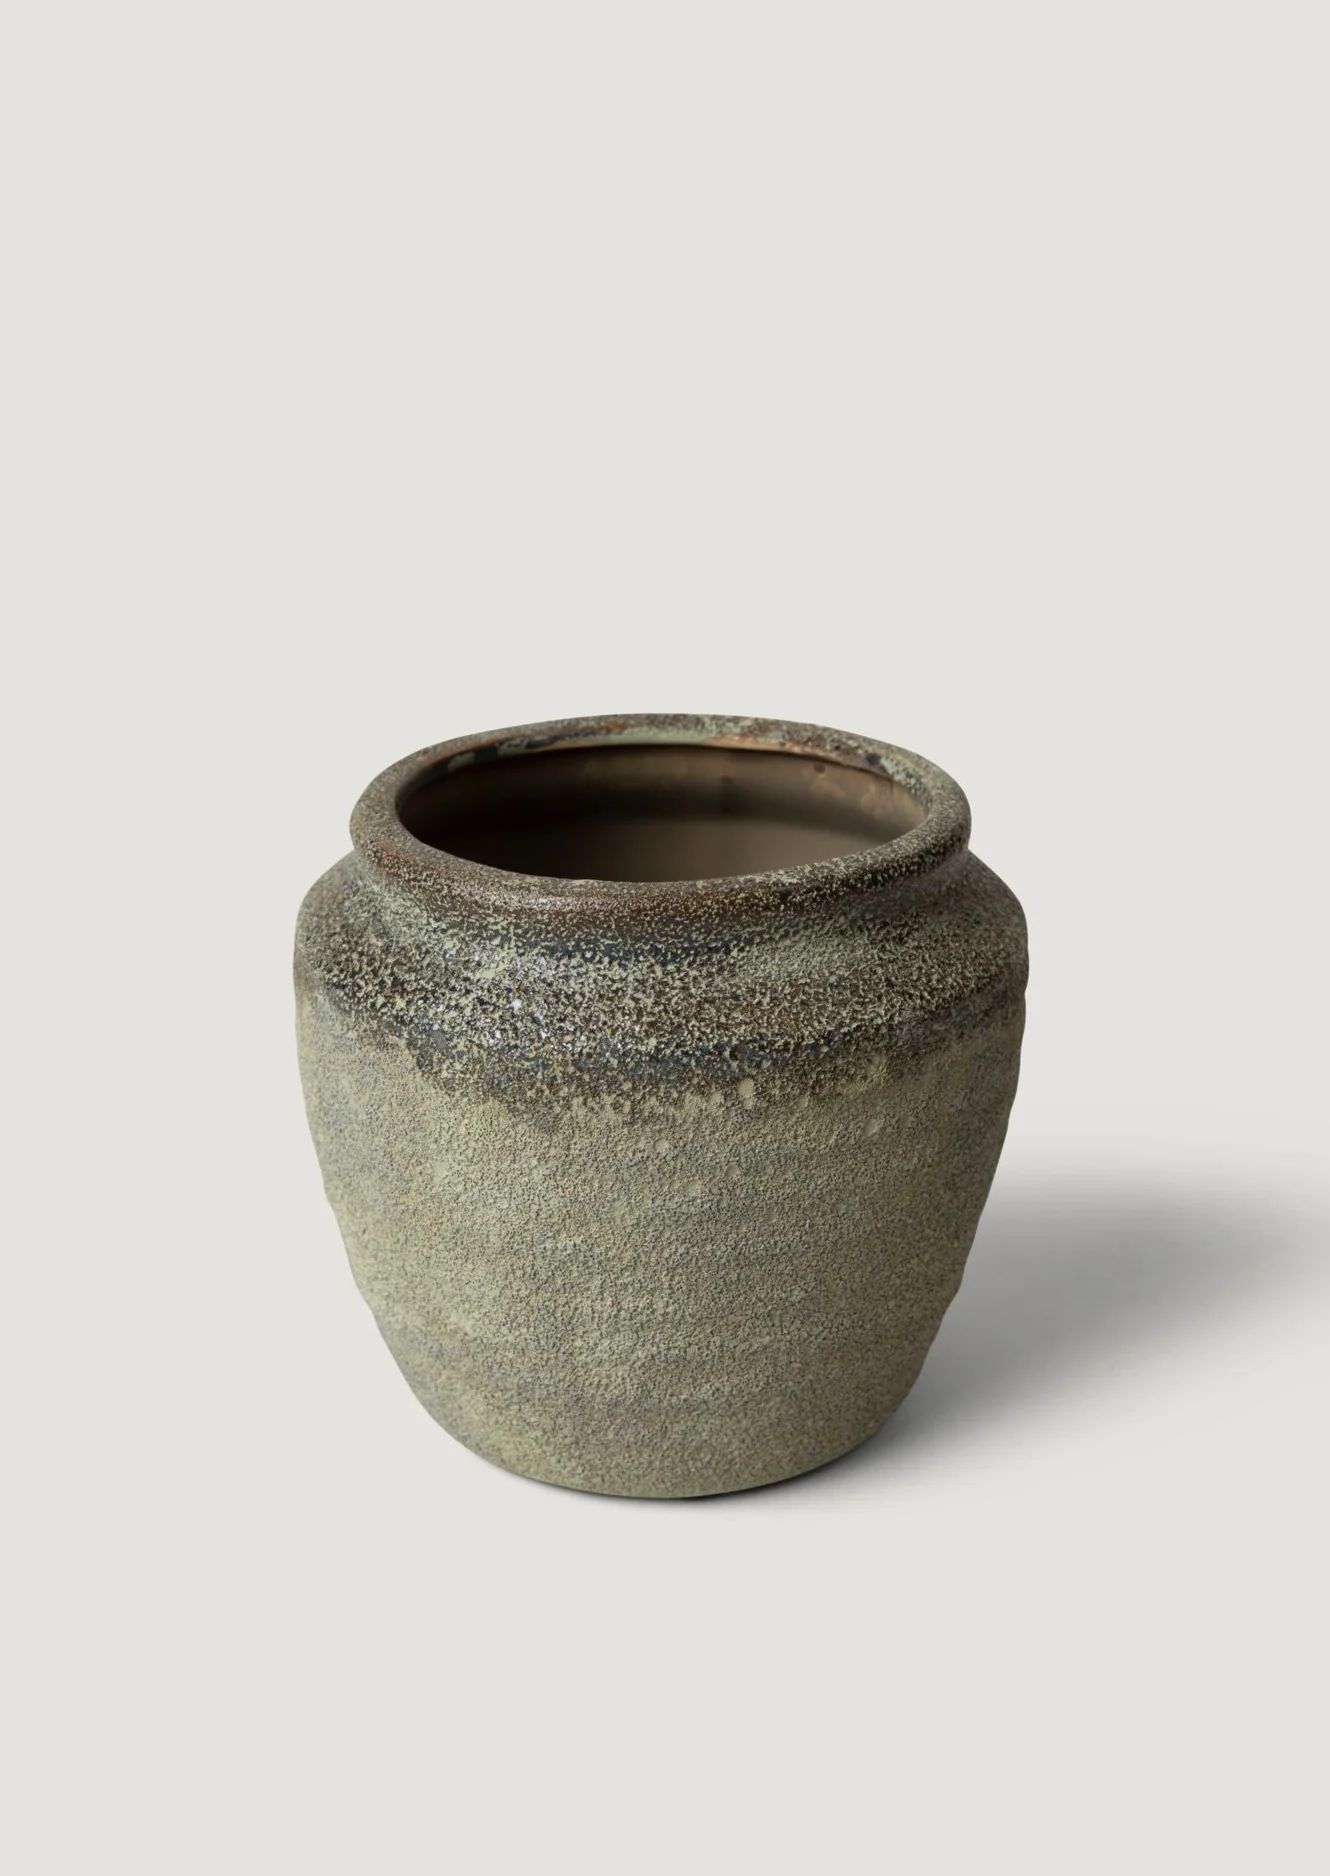 Ceramic Pot in Earth Tones | Planters for Fake Plants at Afloral.com | Afloral